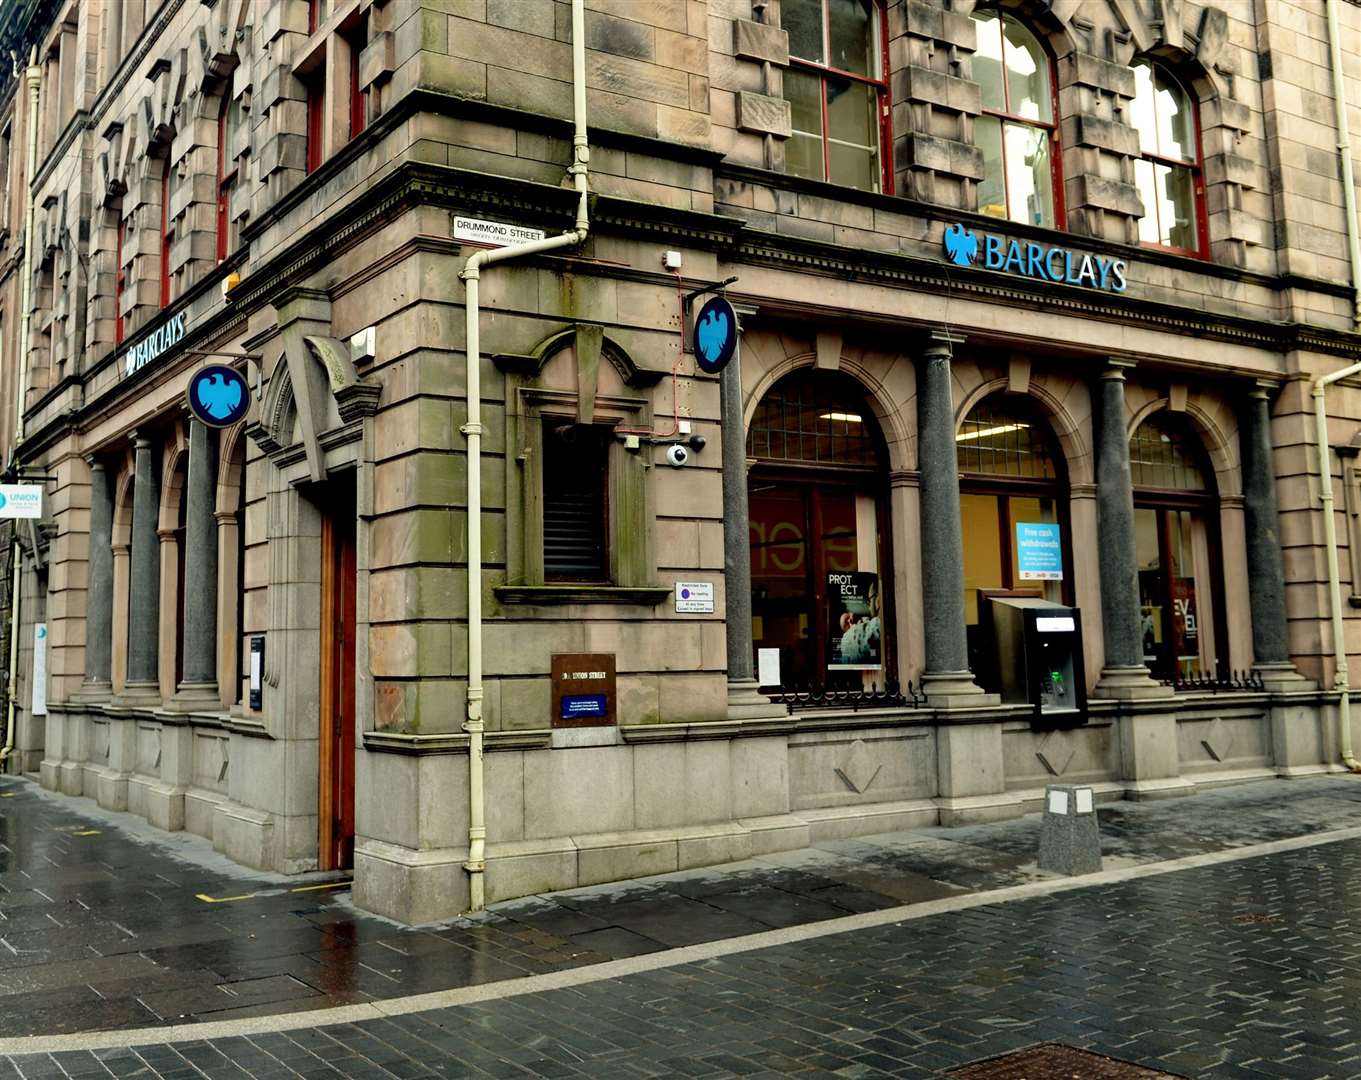 Barclays Bank closes its Inverness branch (pictured) on Friday (May 17) but will open a scaled back Barclays Local facility in the Spectrum Centre in Inverness on Monday (May 20). Picture: James Mackenzie.